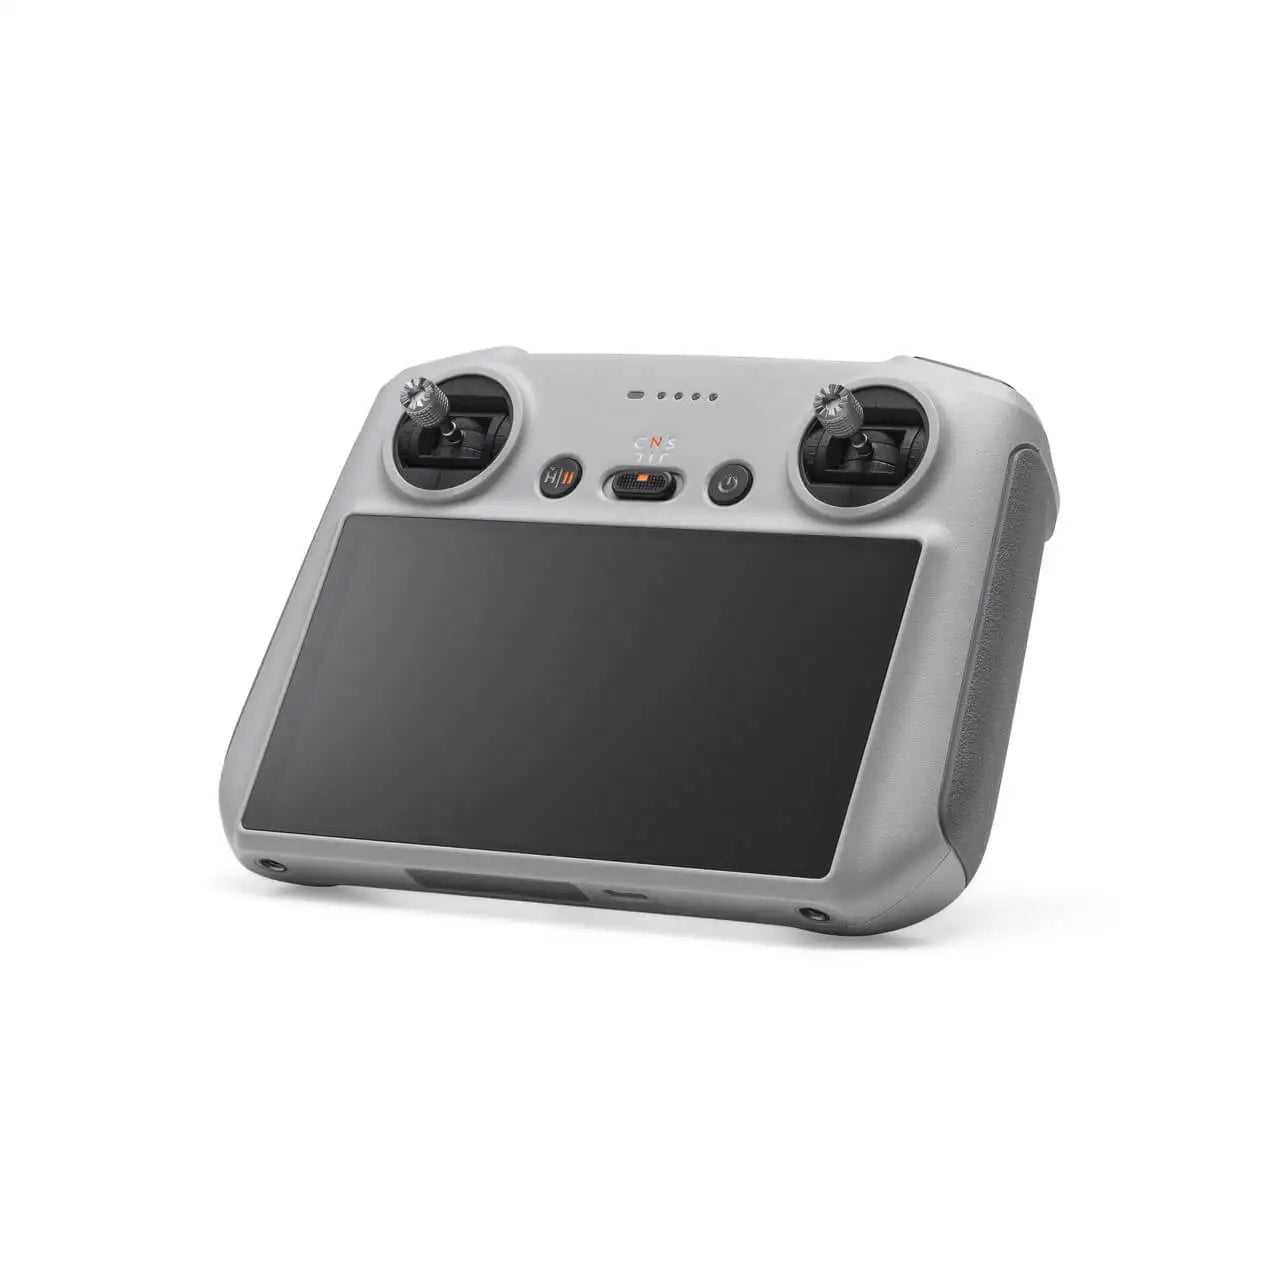 DJI RC Remote Controller, 4.5 W Storage Capacity Expandable (with microSD card) With control sticks: